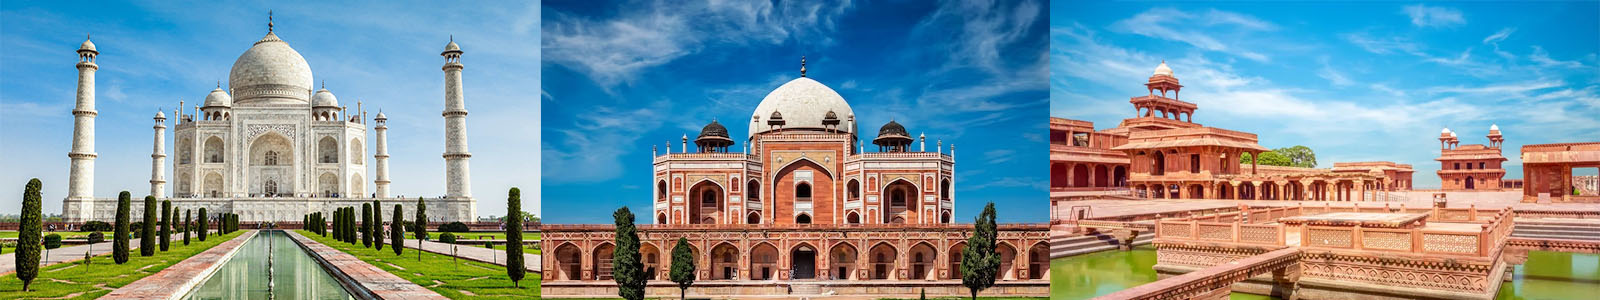 Taj Mahal Private Day Tour From New Delhi with Agra Fort & Fatehpur Sikri